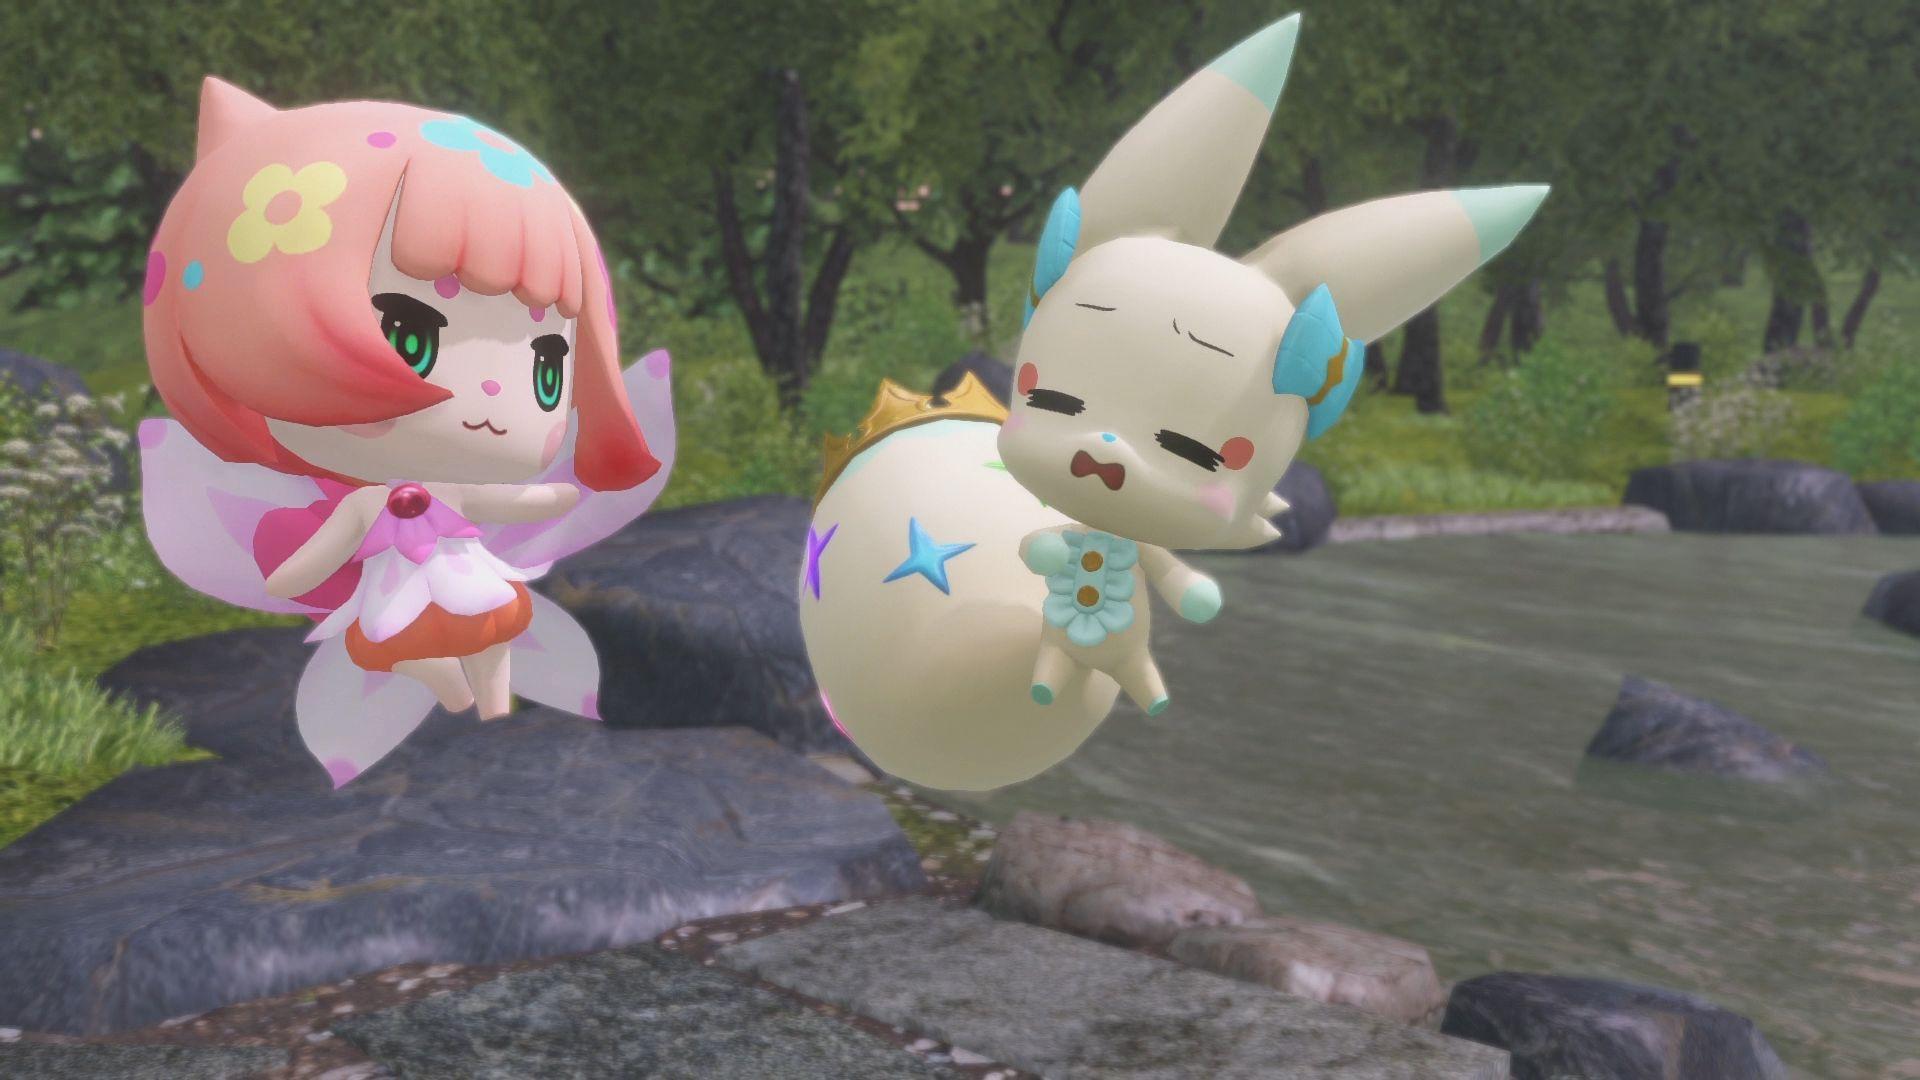 World of Final Fantasy Maxima: now available for consoles and PC